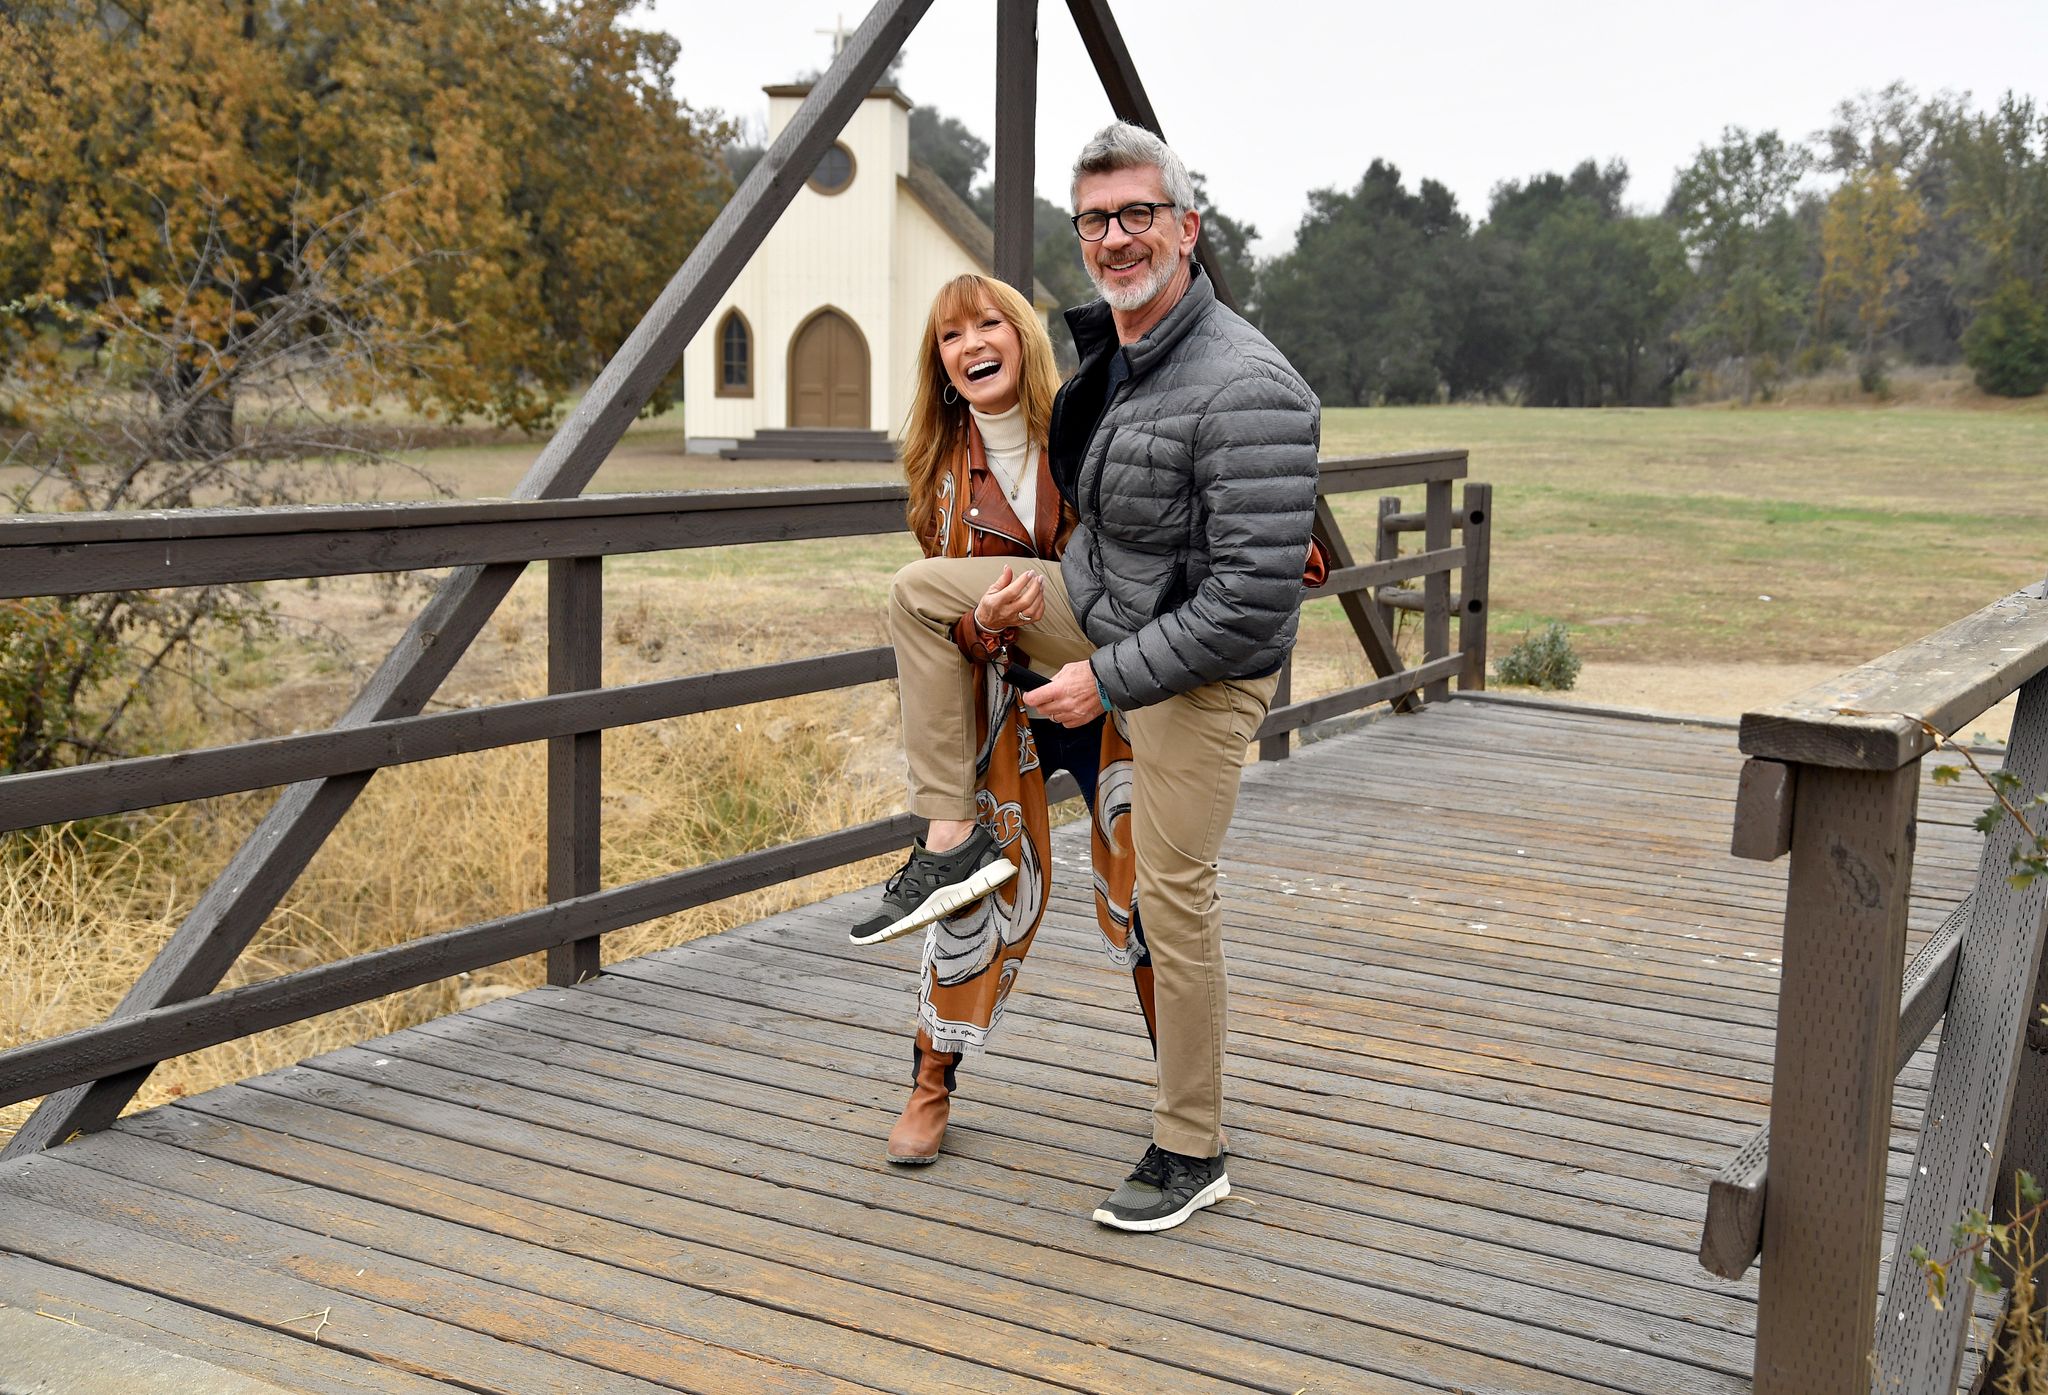 Joe Lando and Jane Seymour during the Open Hearts Foundation's Young Hearts volunteer experience at Paramount Ranch on December 4, 2021, in Agoura Hills, California. | Source: Getty Images